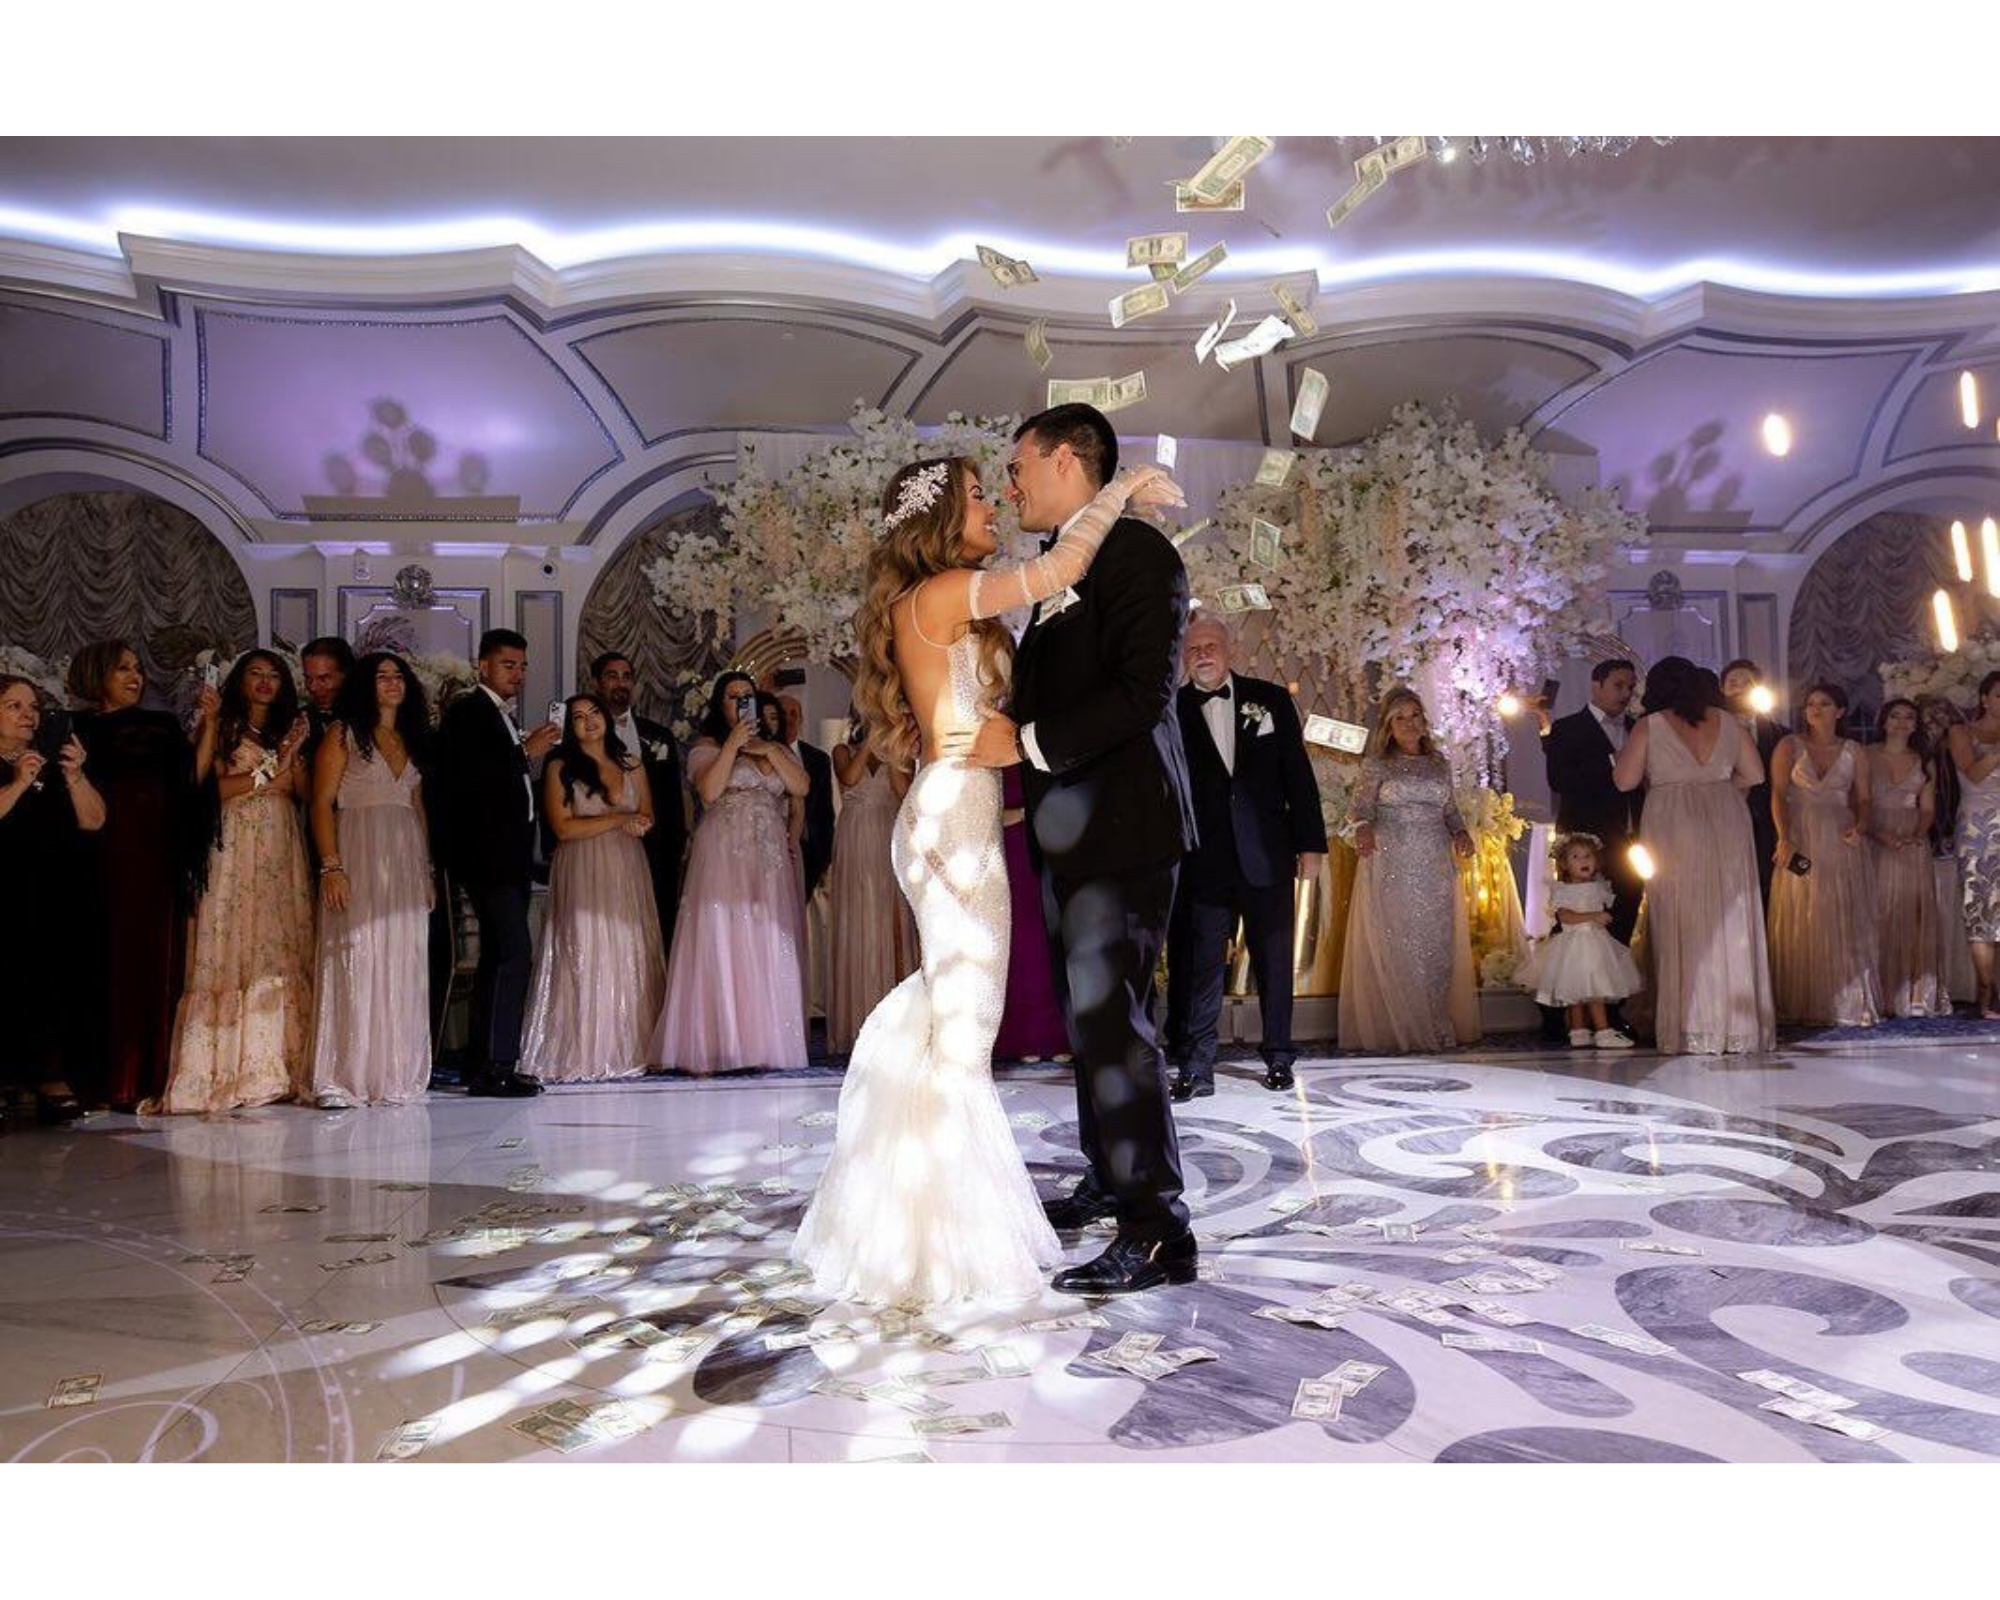 Our beautiful bride Ioanna  dancing with her handsome groom on a purple and white dance floor.